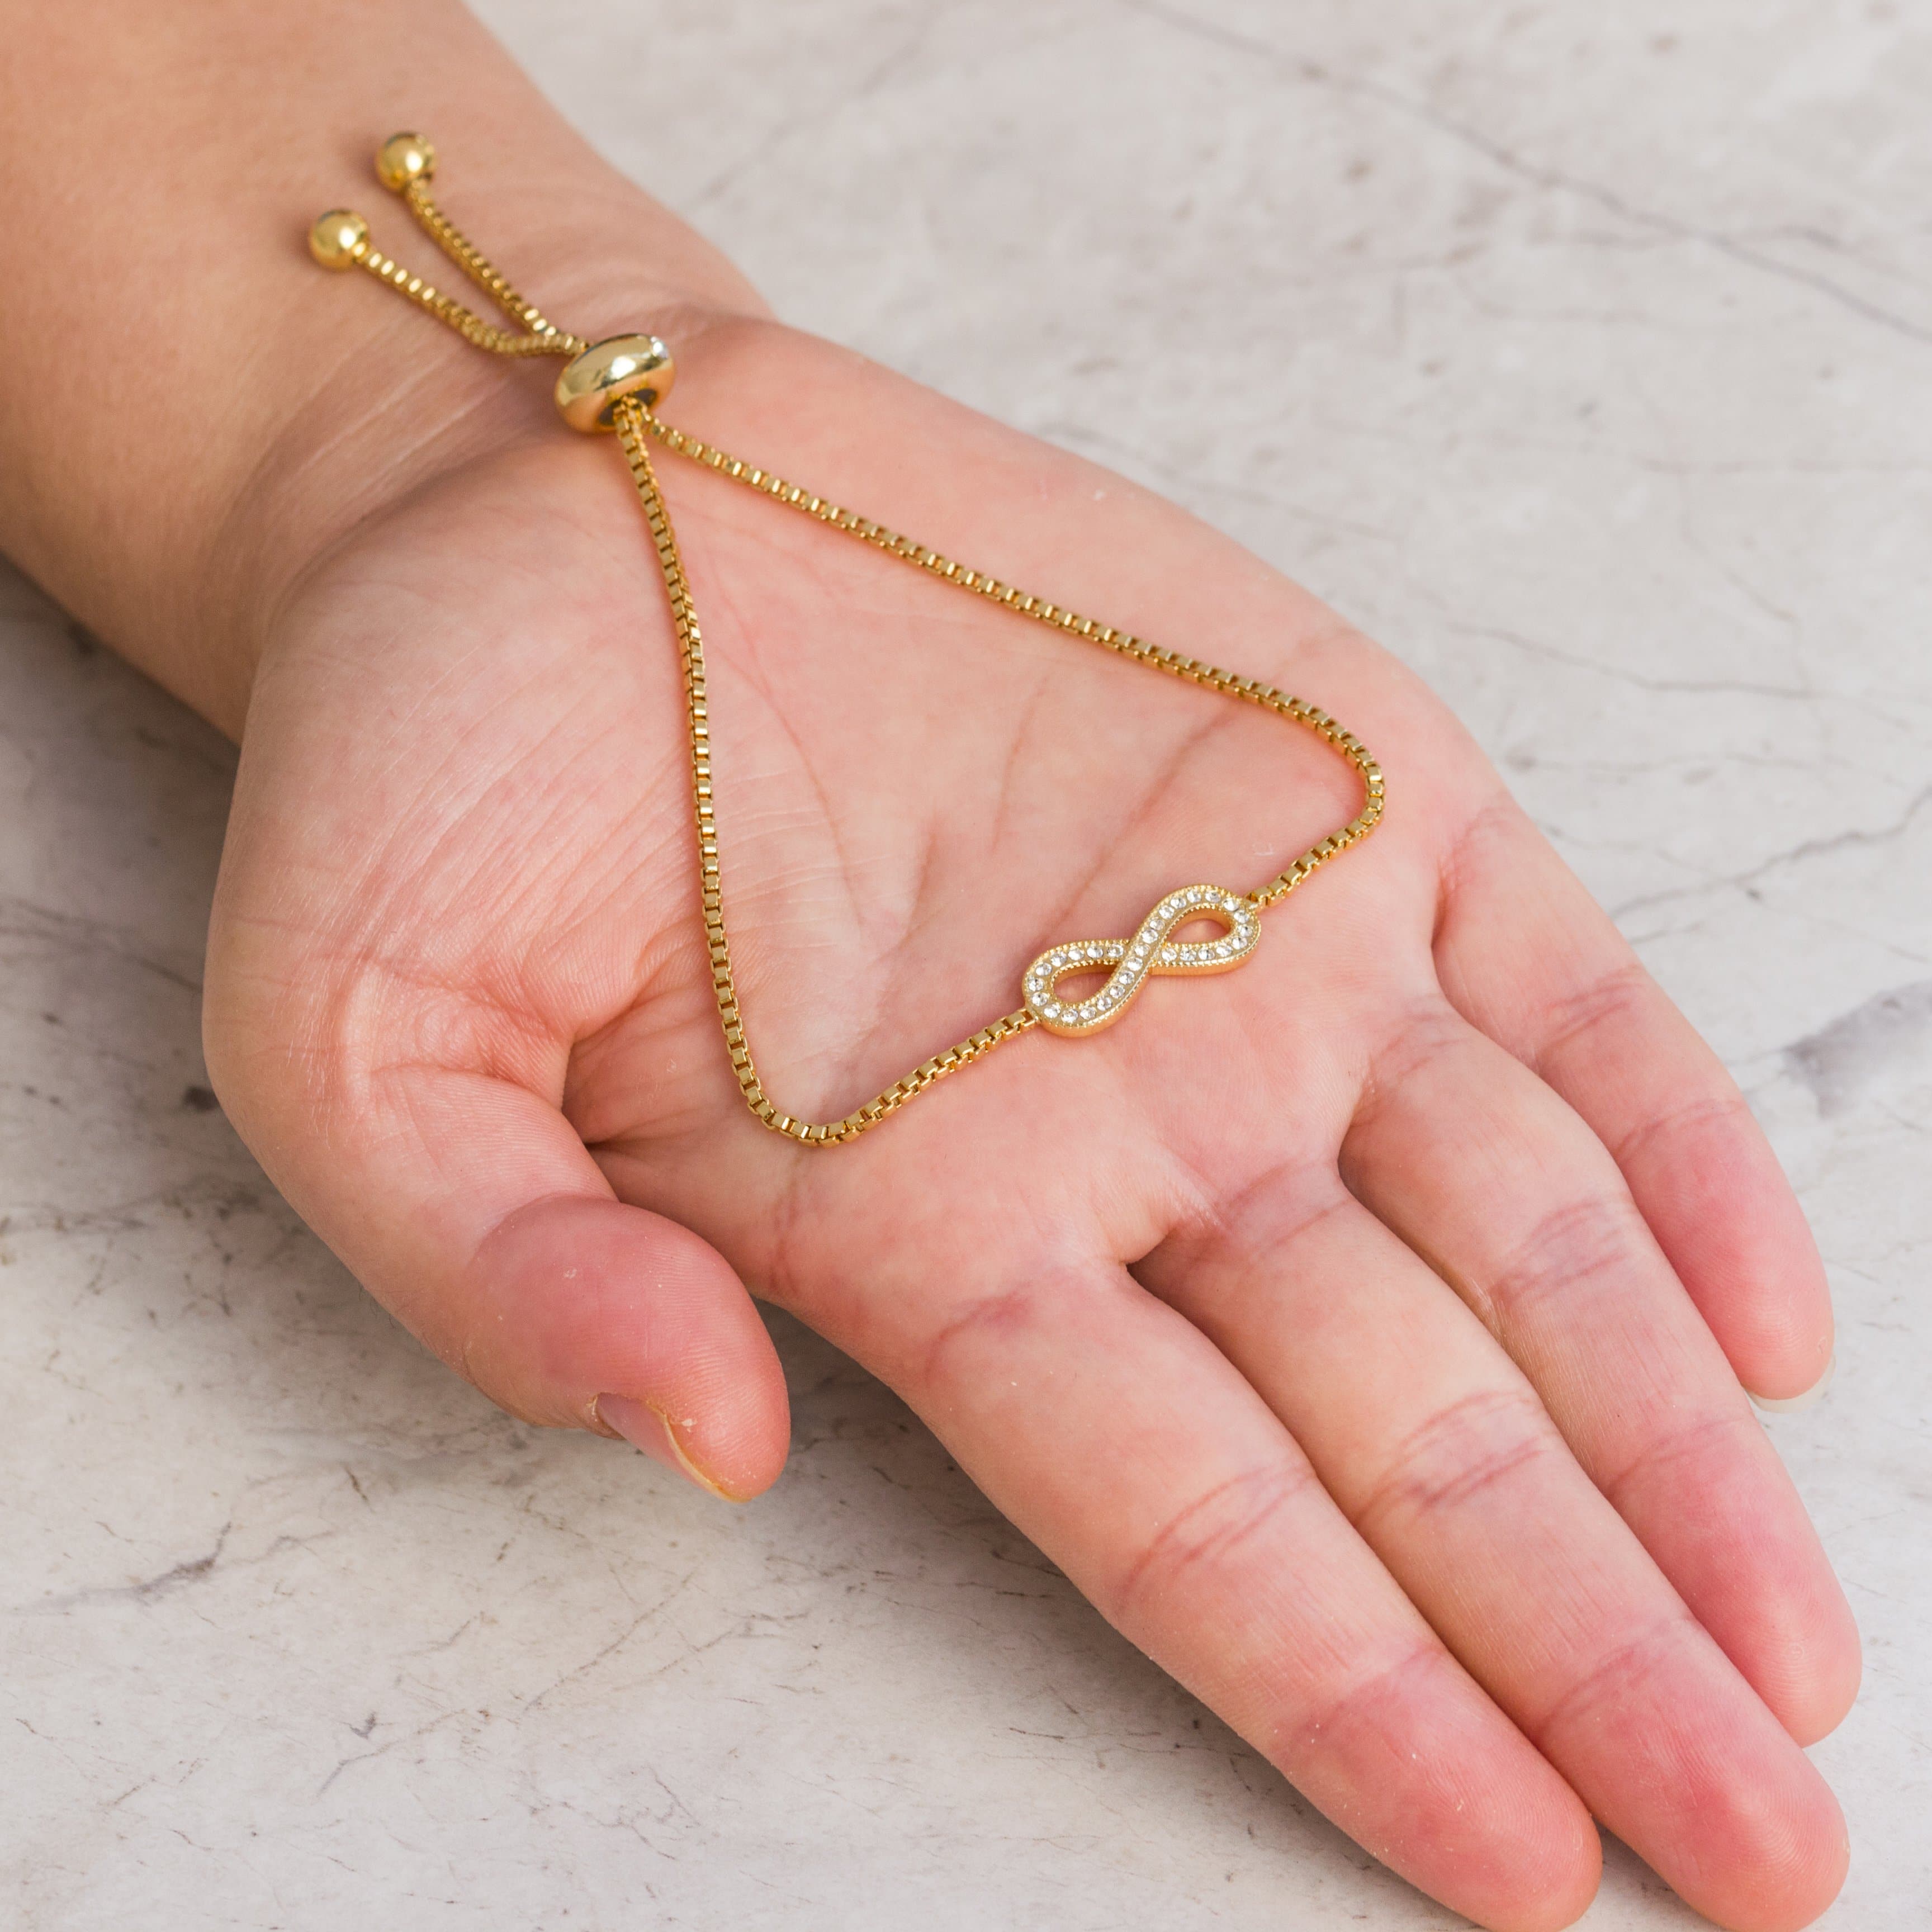 Gold Plated Infinity Friendship Bracelet Created with Zircondia® Crystals